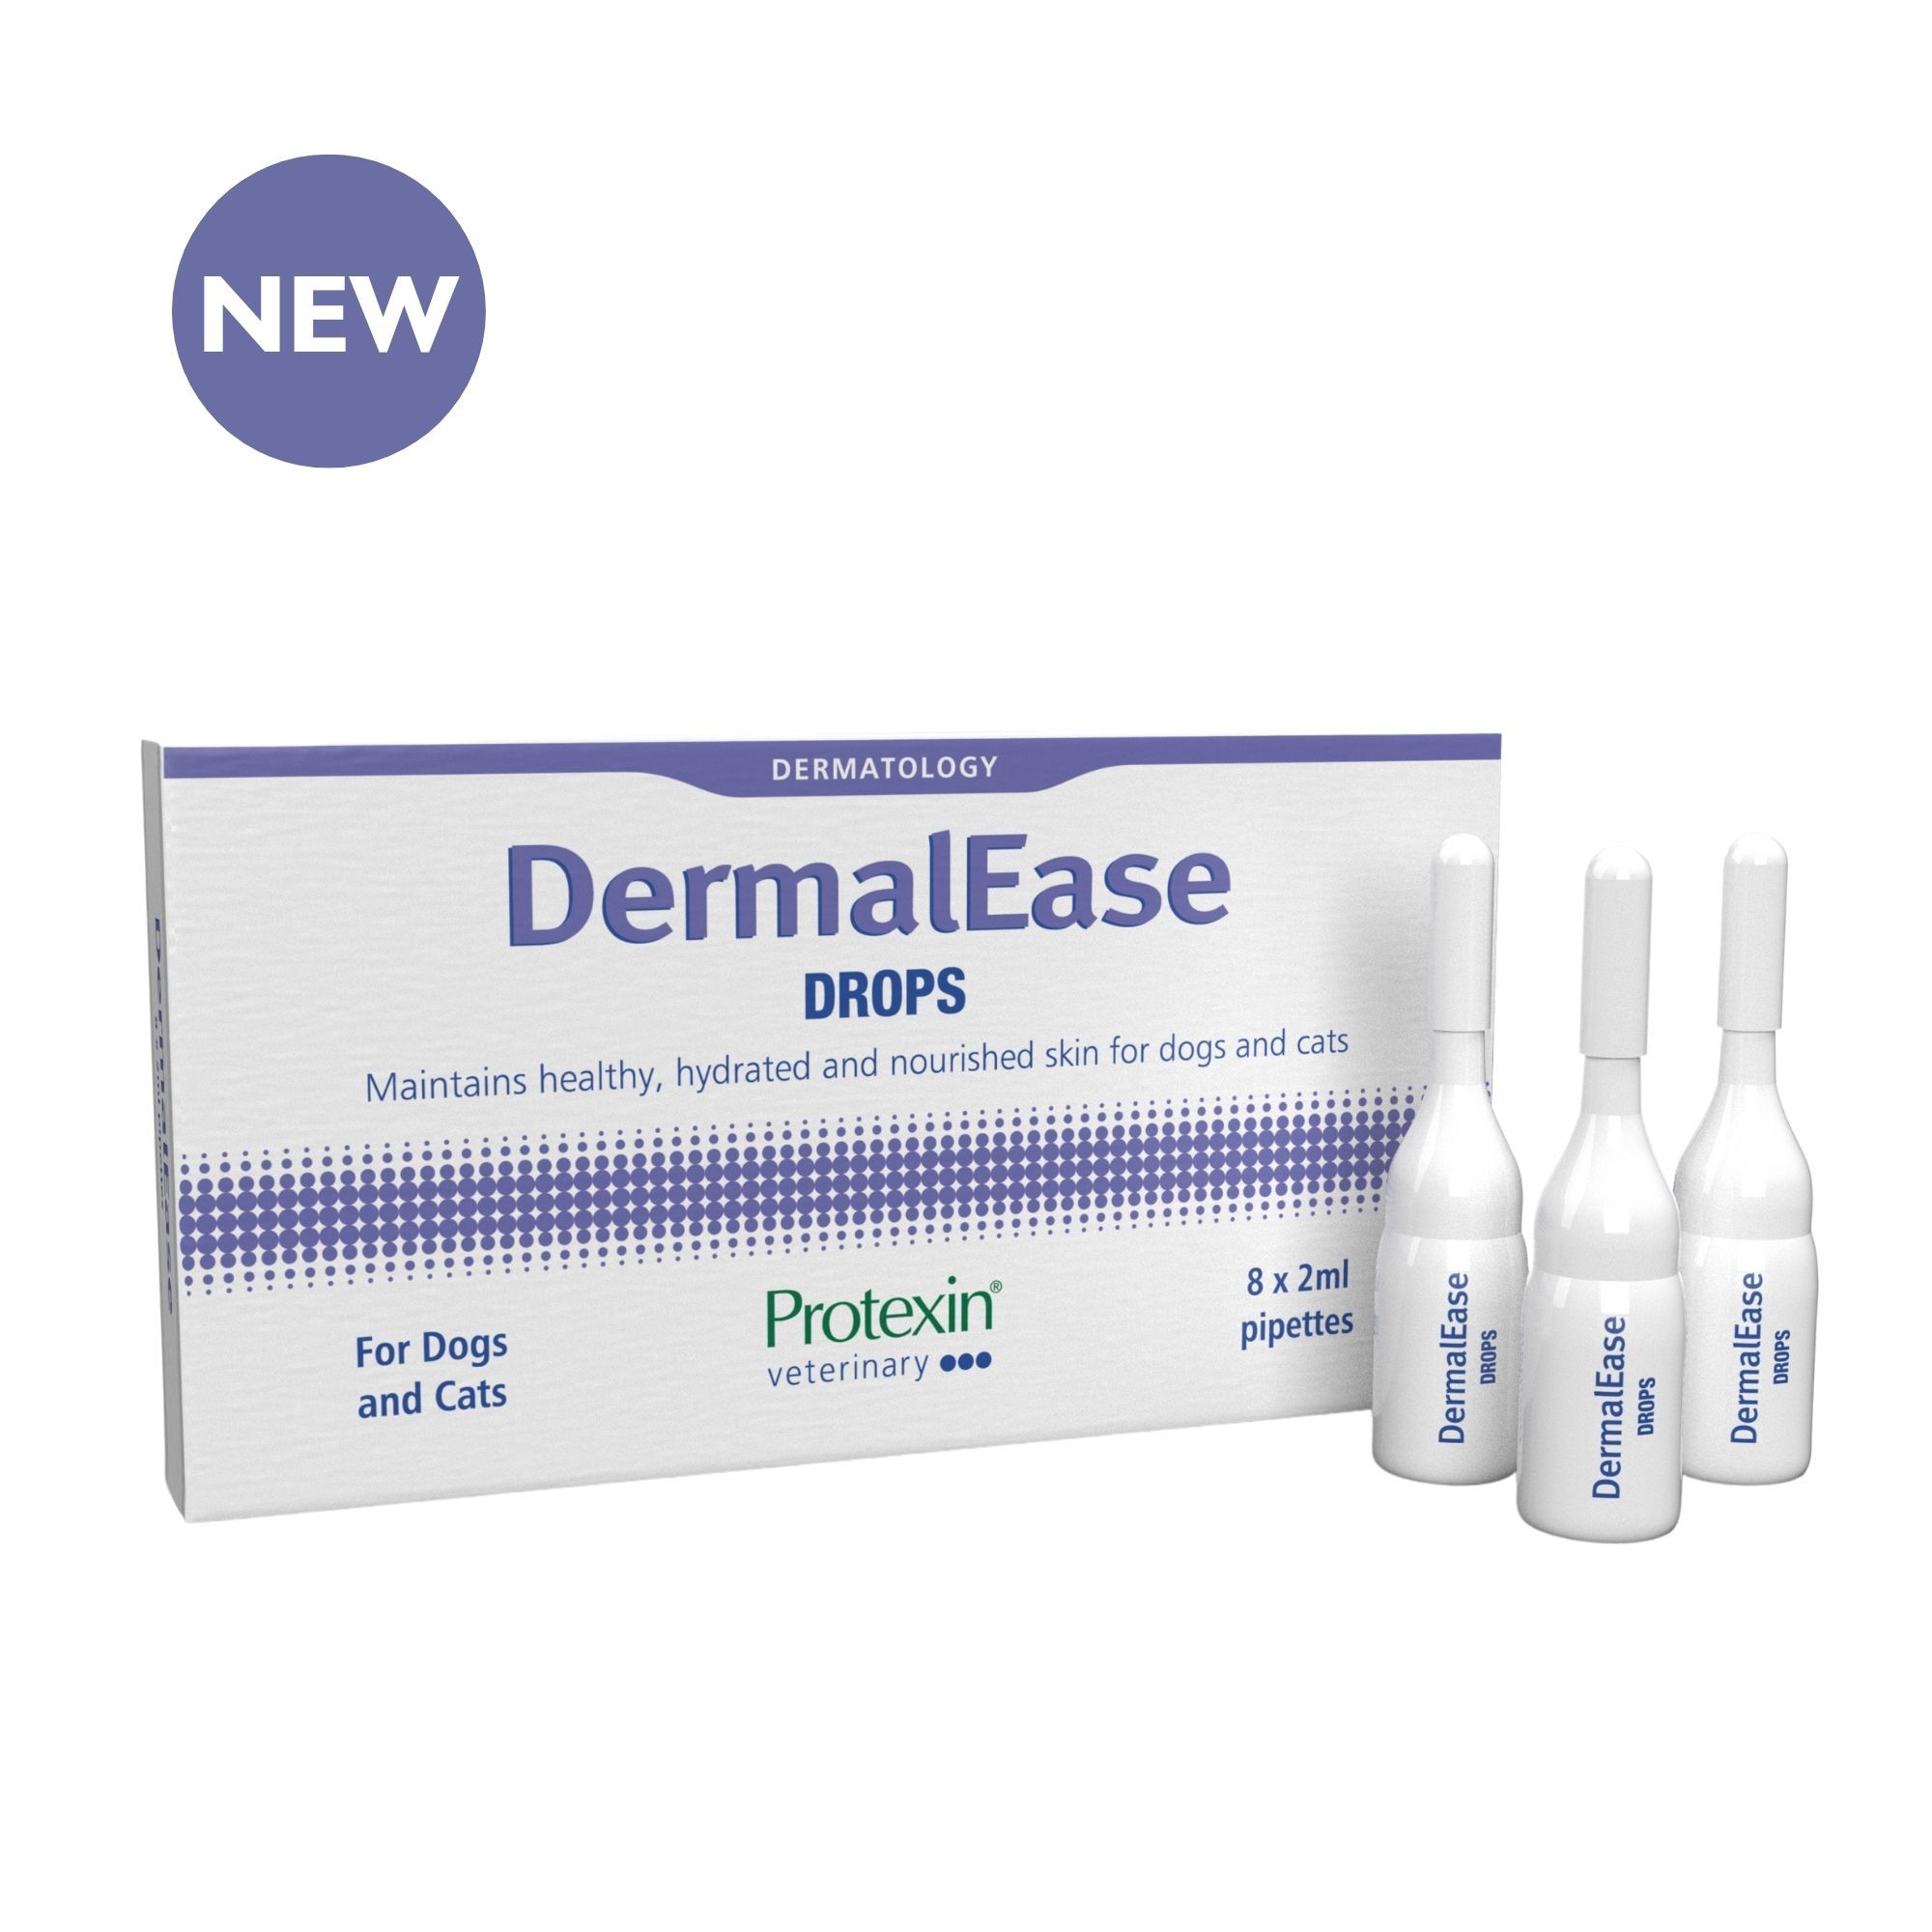 DermalEase Drops for Dogs and Cats - Protexin Vet